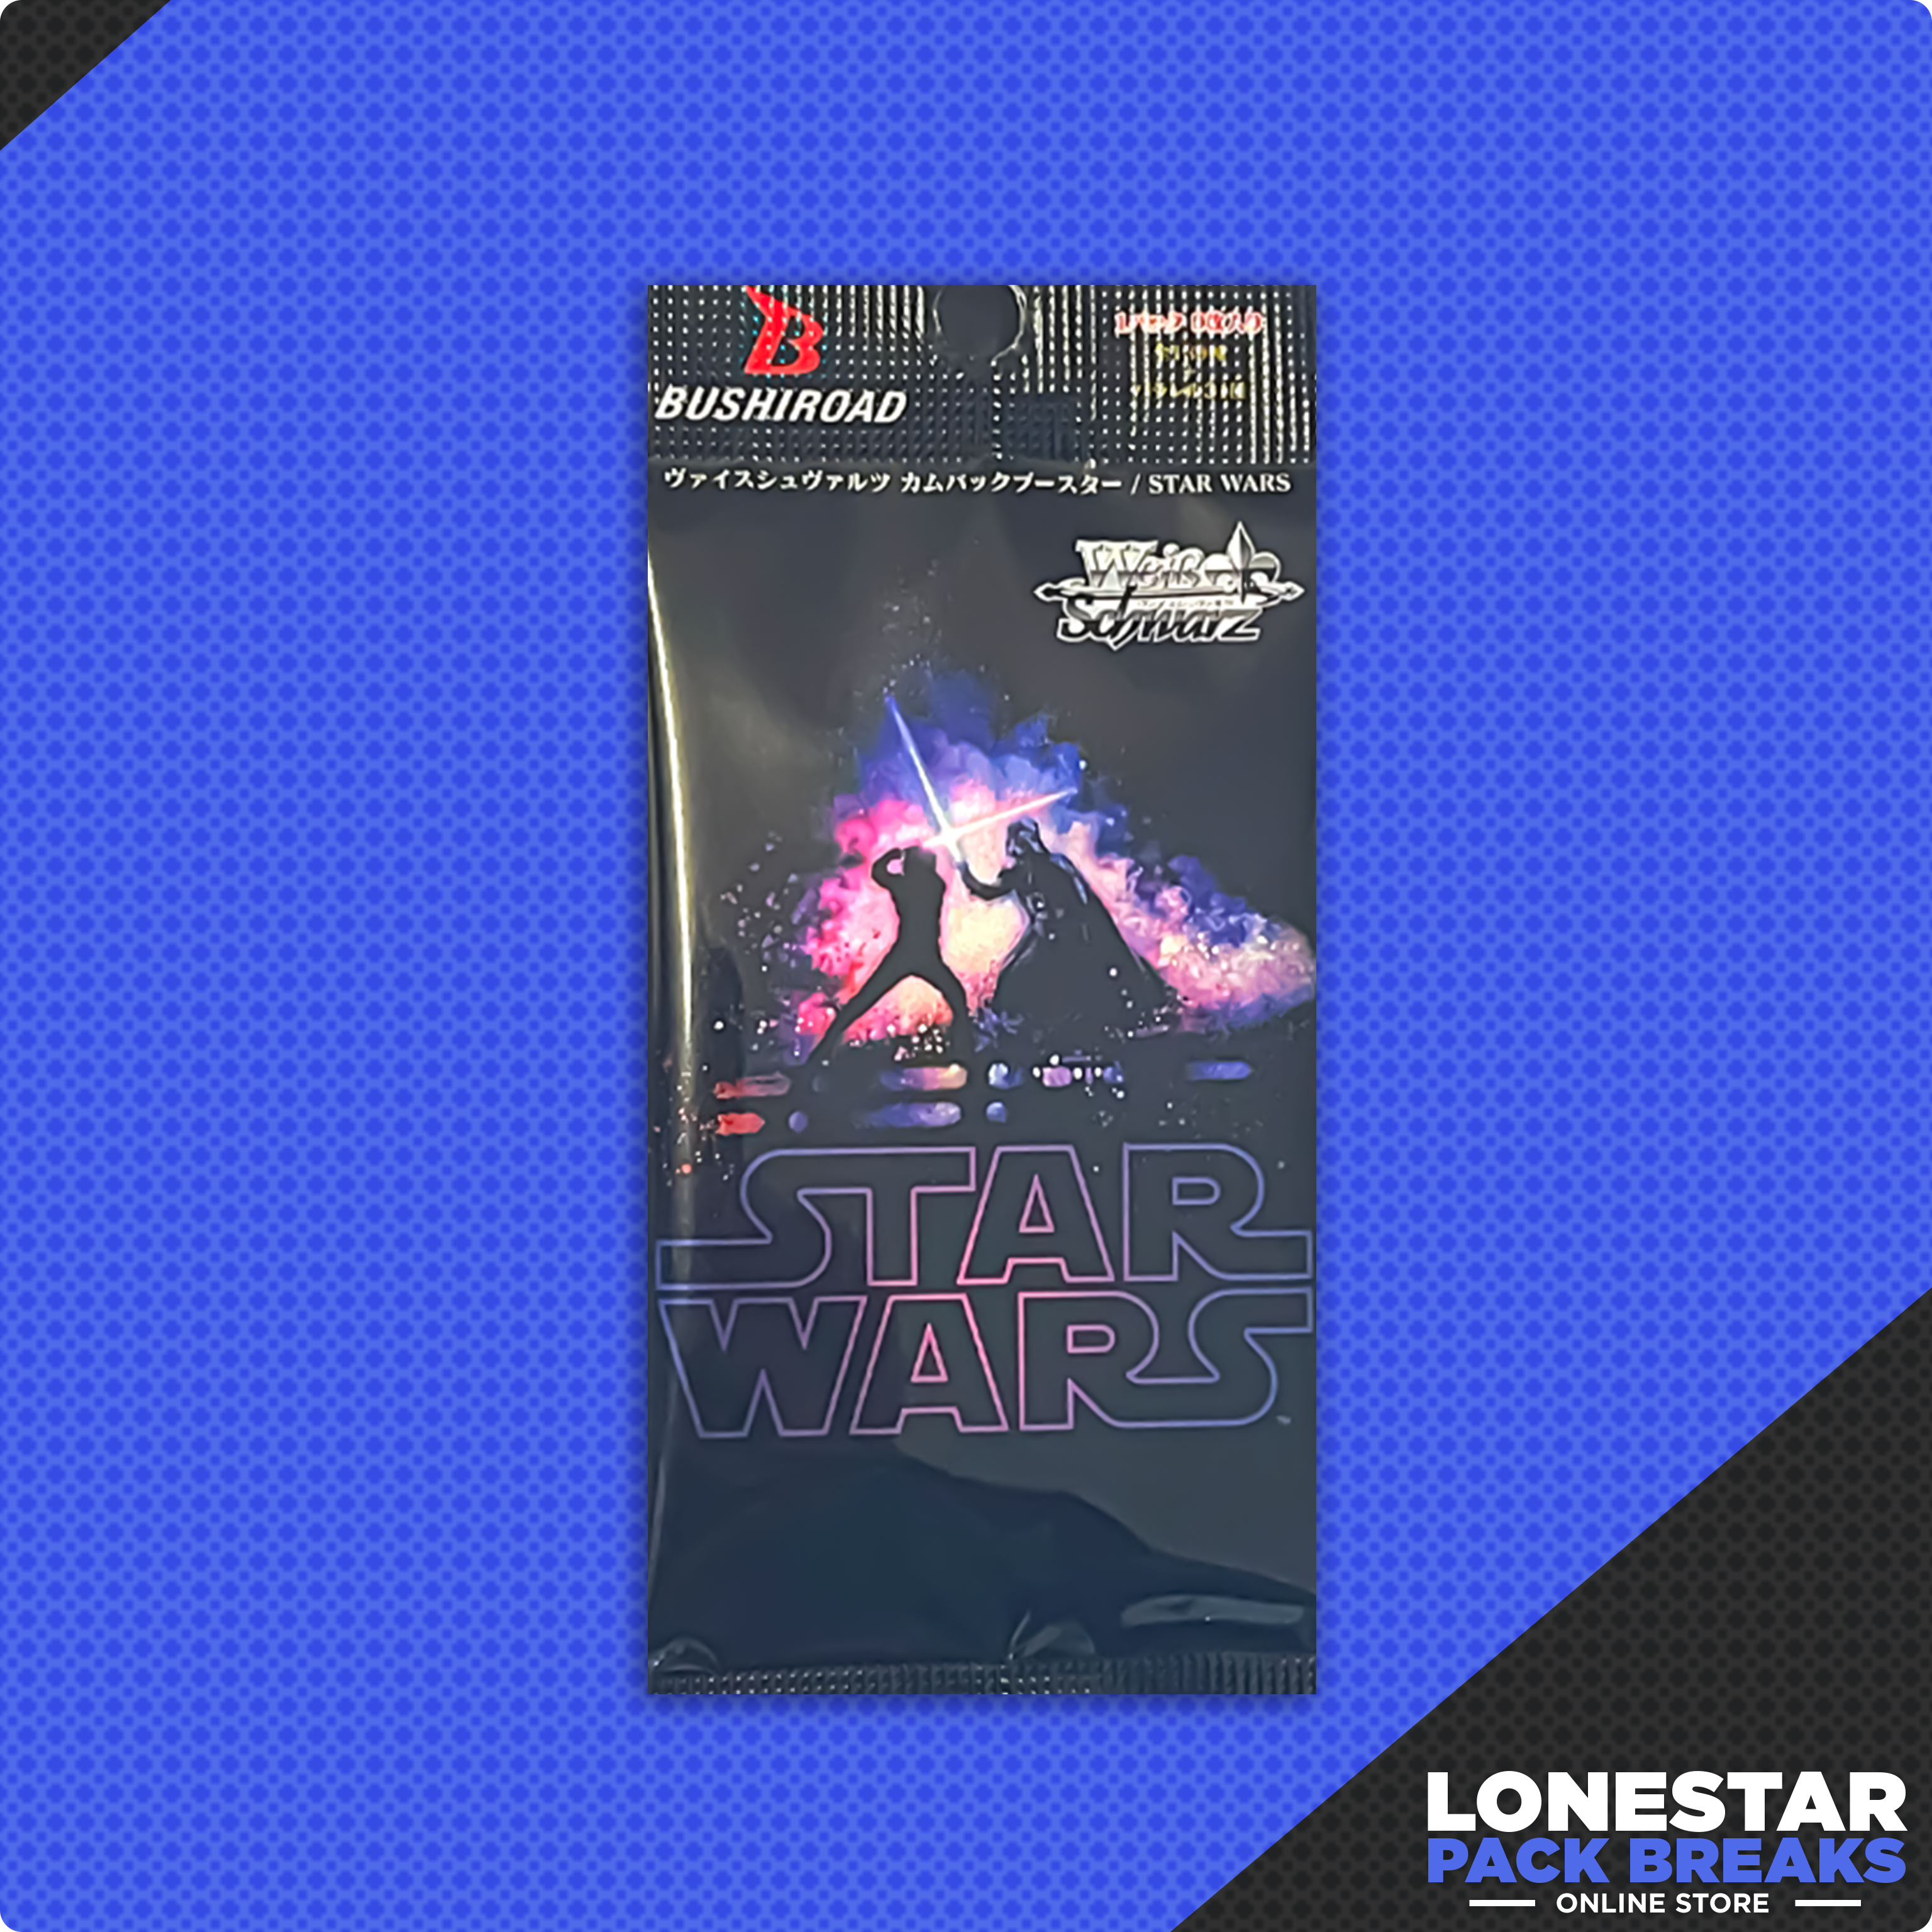 Star Wars Booster Pack-Japanese